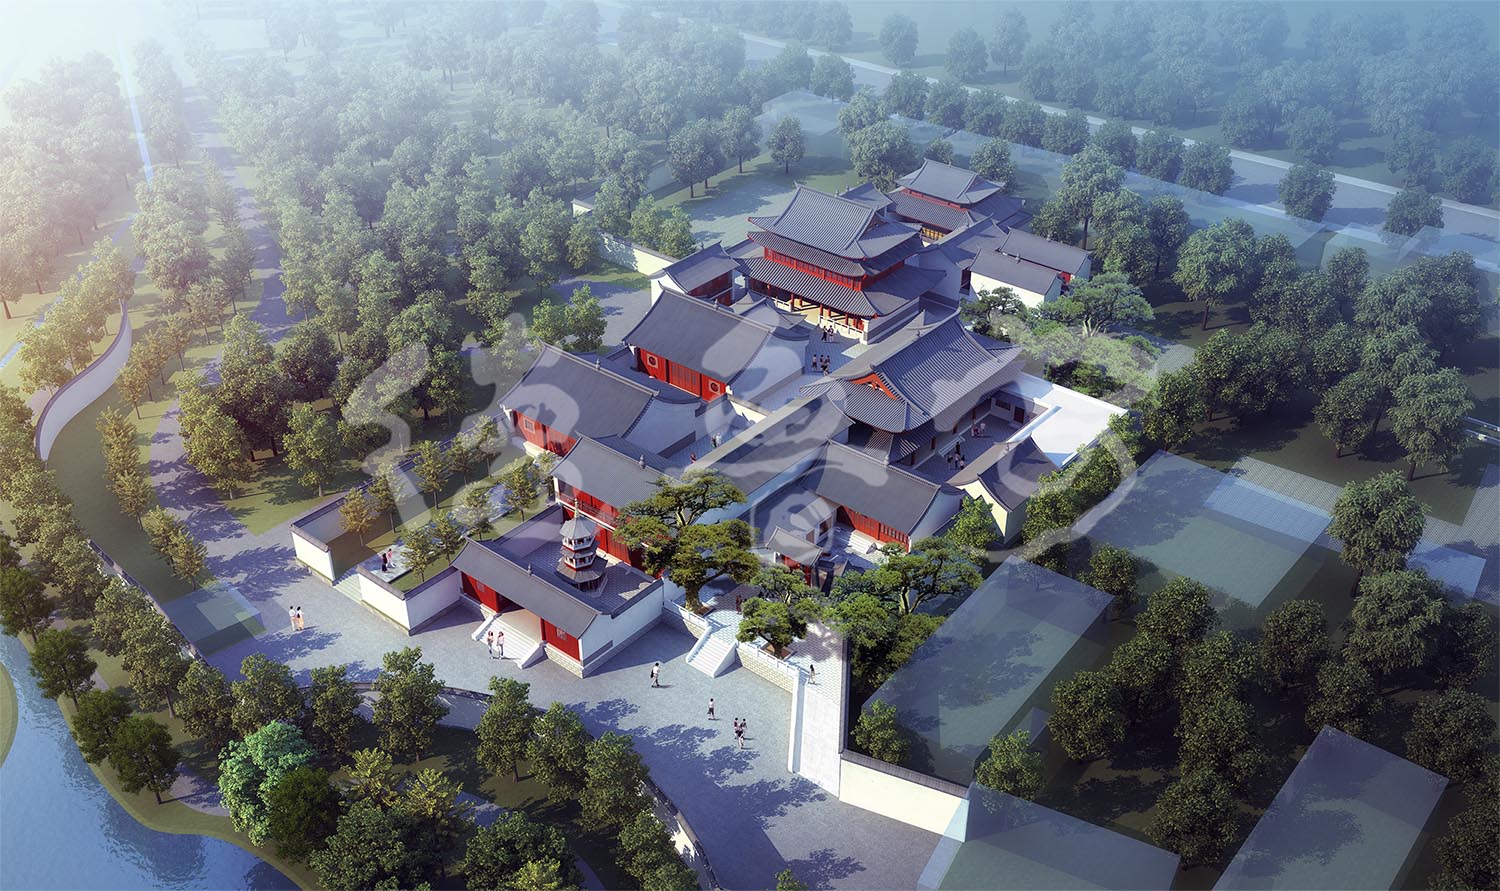 Overall planning and design of Huayan Temple in Tengchong Yunnan